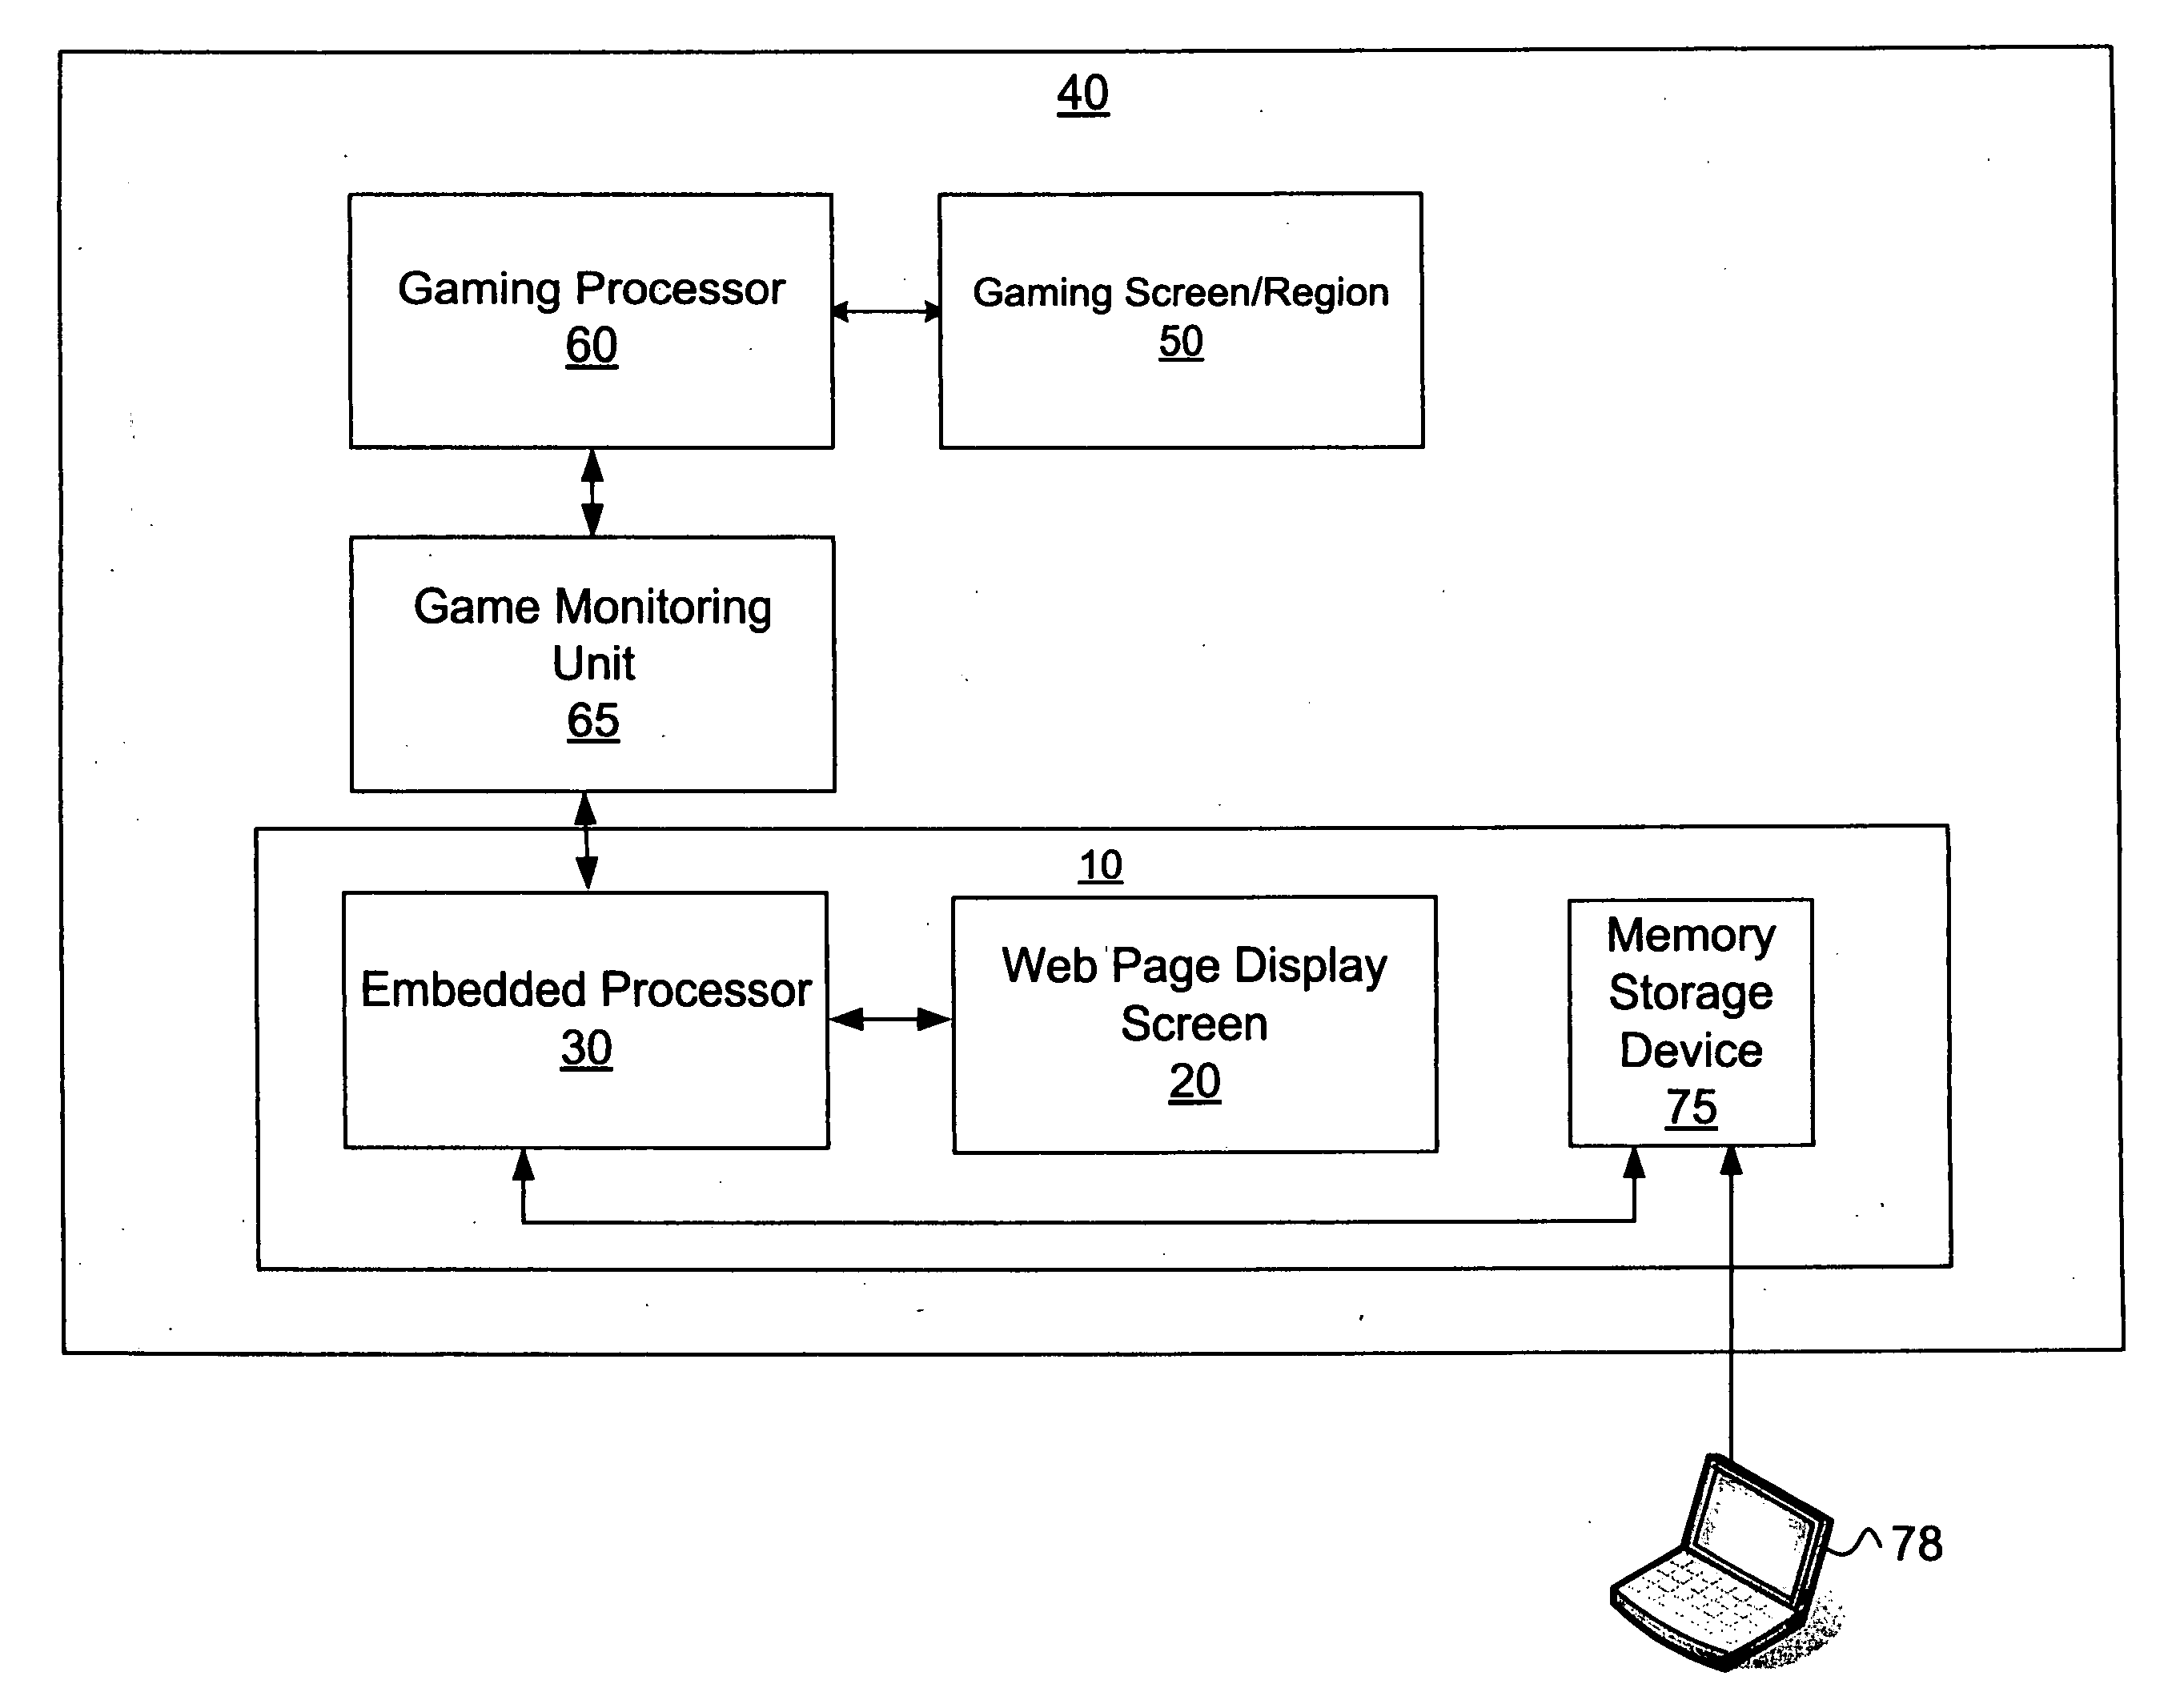 User interface system and method for a gaming machine